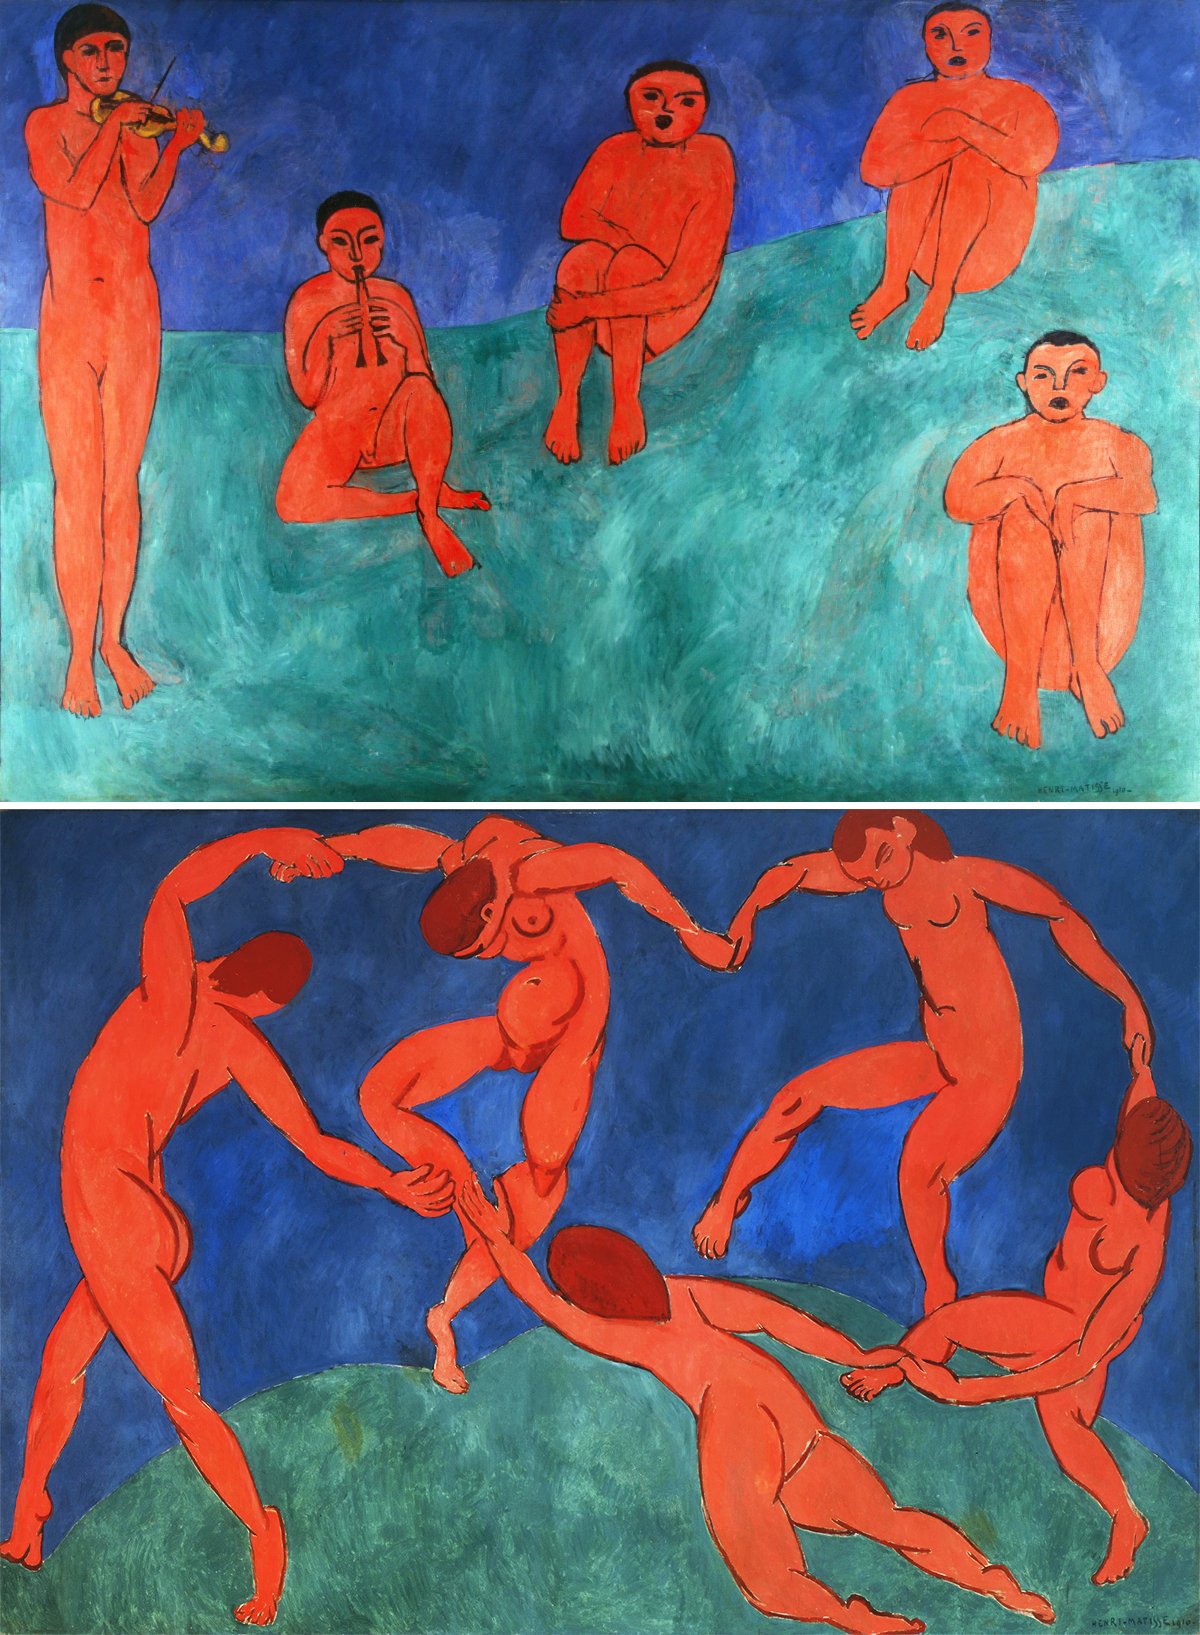 This image displays two panels by Henri Matisse, "Music" (top) and "Dance" (bottom), created in 1910. "The Dance '' features a circle of five nude figures holding hands against a vibrant blue background, dancing atop a lush green hill. The figures are rendered in a striking red, symbolizing their inner vitality and passion. "Music" presents four figures seated in a line and one standing engaged in playing musical instruments and singing, set against a similarly intense blue backdrop with a green base, suggesting a connection to earth and cosmos. Both works exemplify Matisse's bold Fauvist style, with a reduced color palette of green, red, and blue, and simplified, almost abstracted human forms. The paintings radiate a dynamic contrast between the frenetic energy of "The Dance" and the serene concentration of "Music," capturing the essence of human creativity and its harmony with nature.